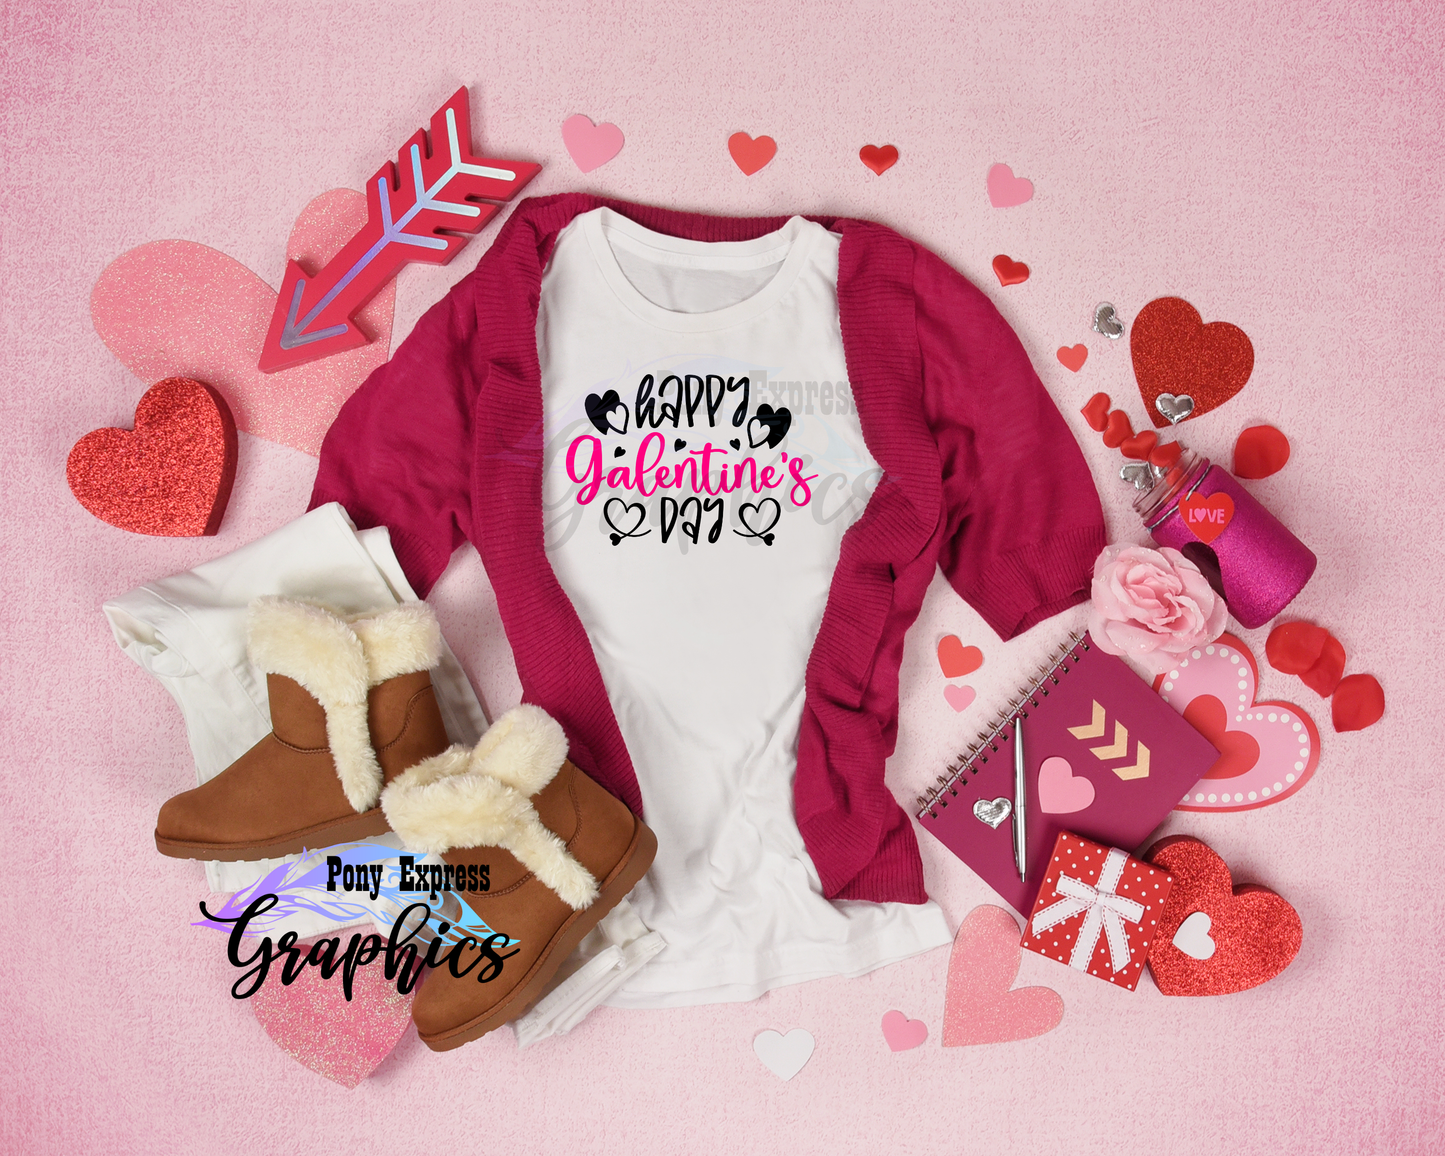 Happy Galentine's Day - t-shirt with Glitter option  Colorful shirts,  Branded shirts, Happy galentines day